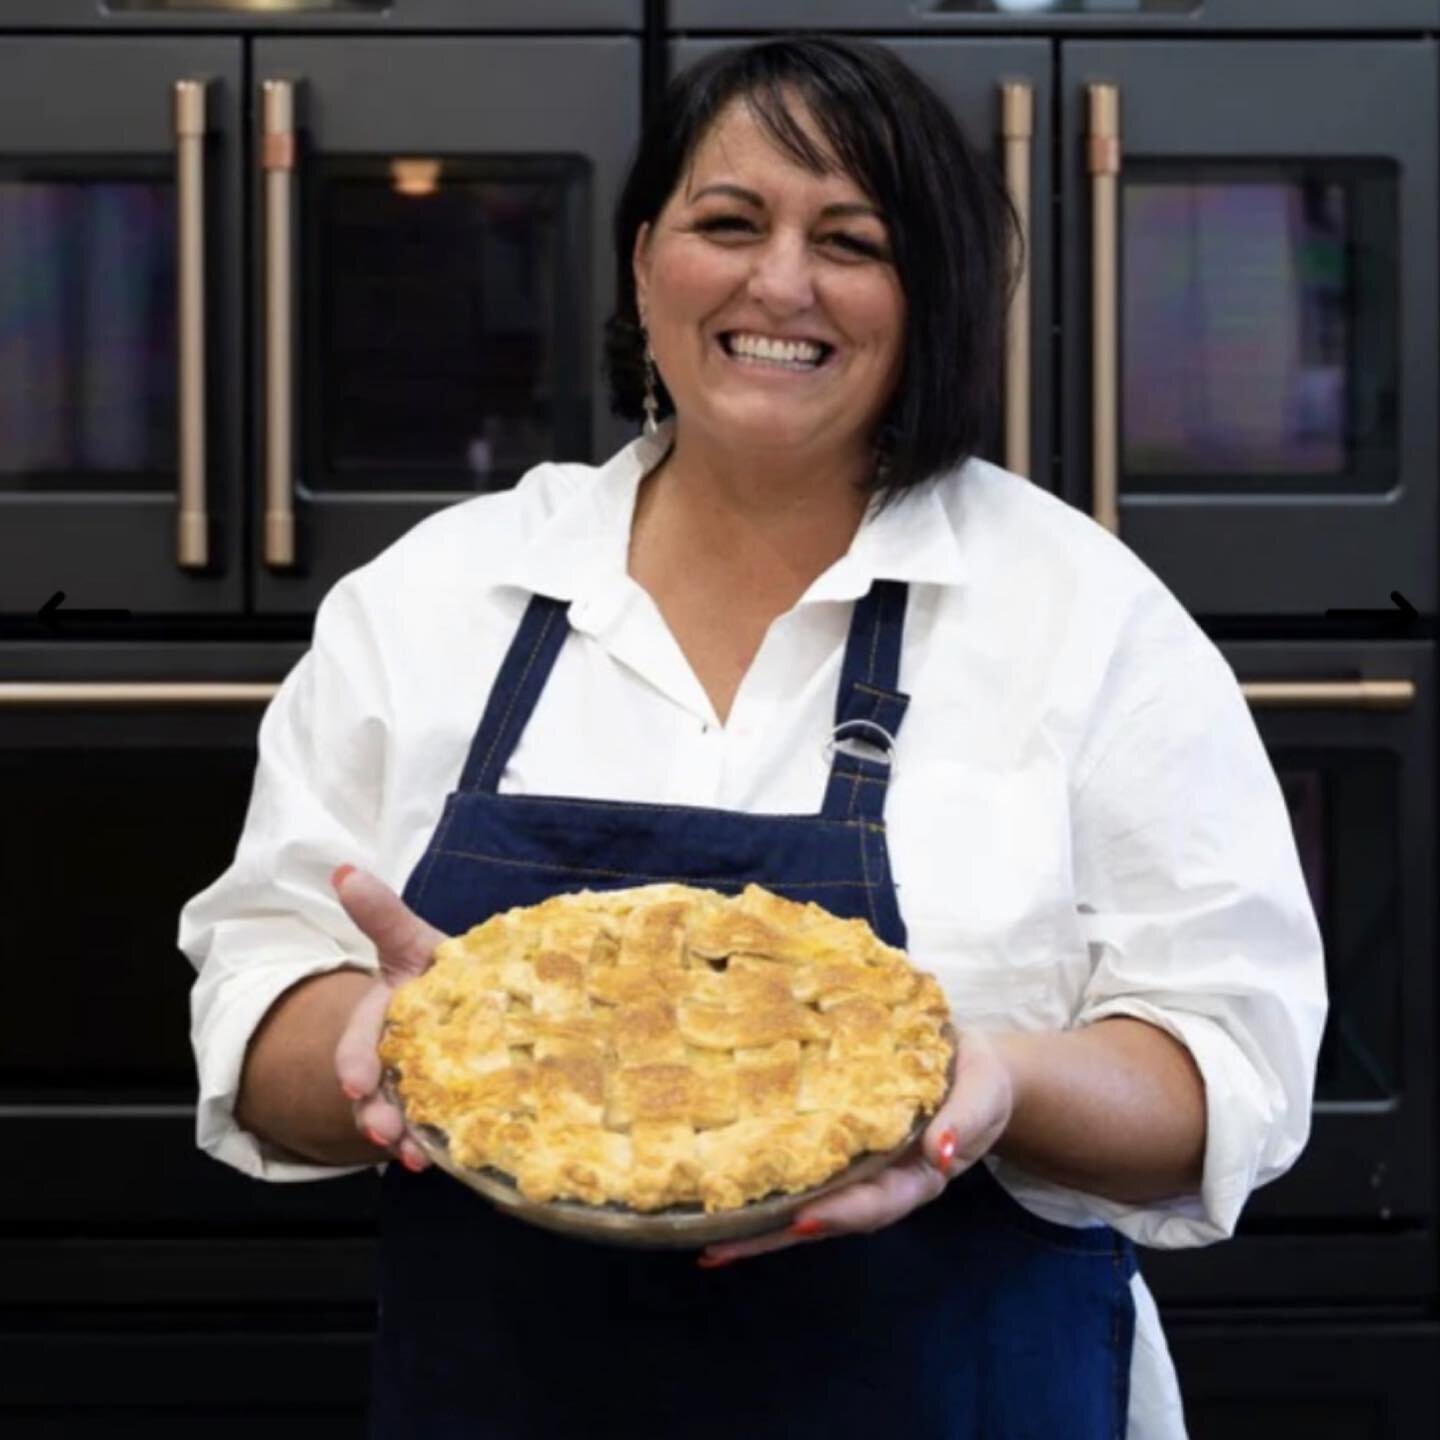 We are so excited to announce our first round of cookie decorating classes! And we are thrilled to welcome our guest host, Chef Jean Andrew. Jean is a seasoned pastry chef. She has been baking professionally and at home for over 20 years. Jeans hands